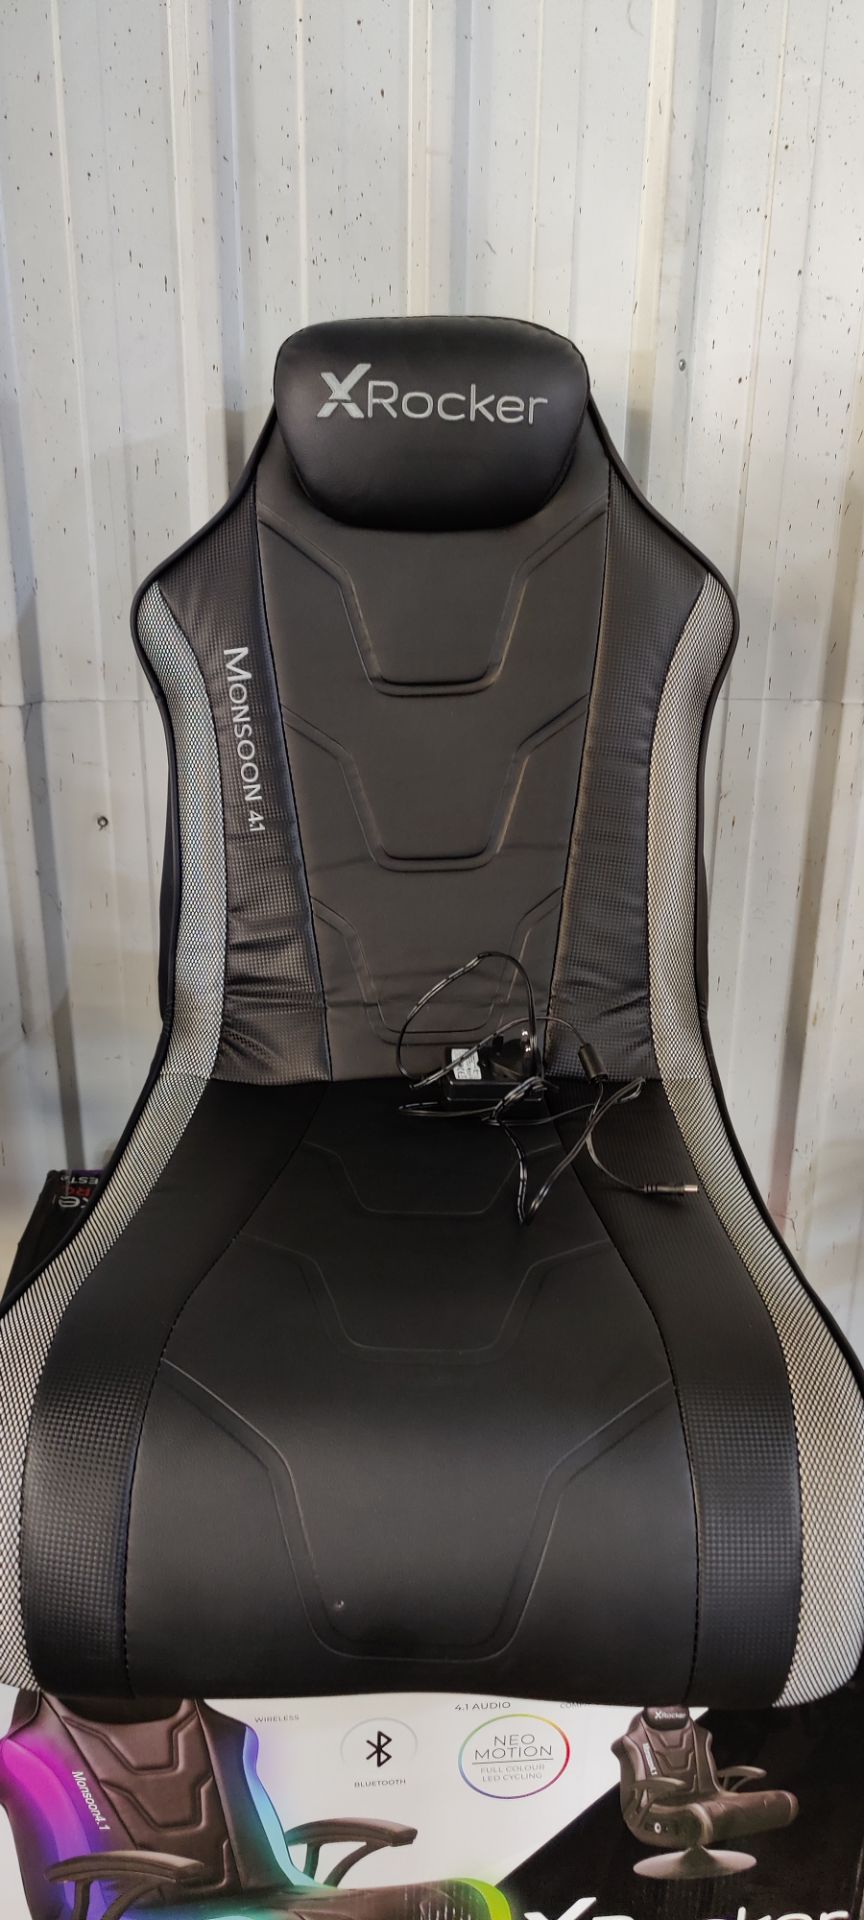 (P1) 1x X-Rocker Monsoon RGB 4.1 Audio Pedestal Gaming Chair RRP £269. Gaming Chair And Power Cable - Image 3 of 4